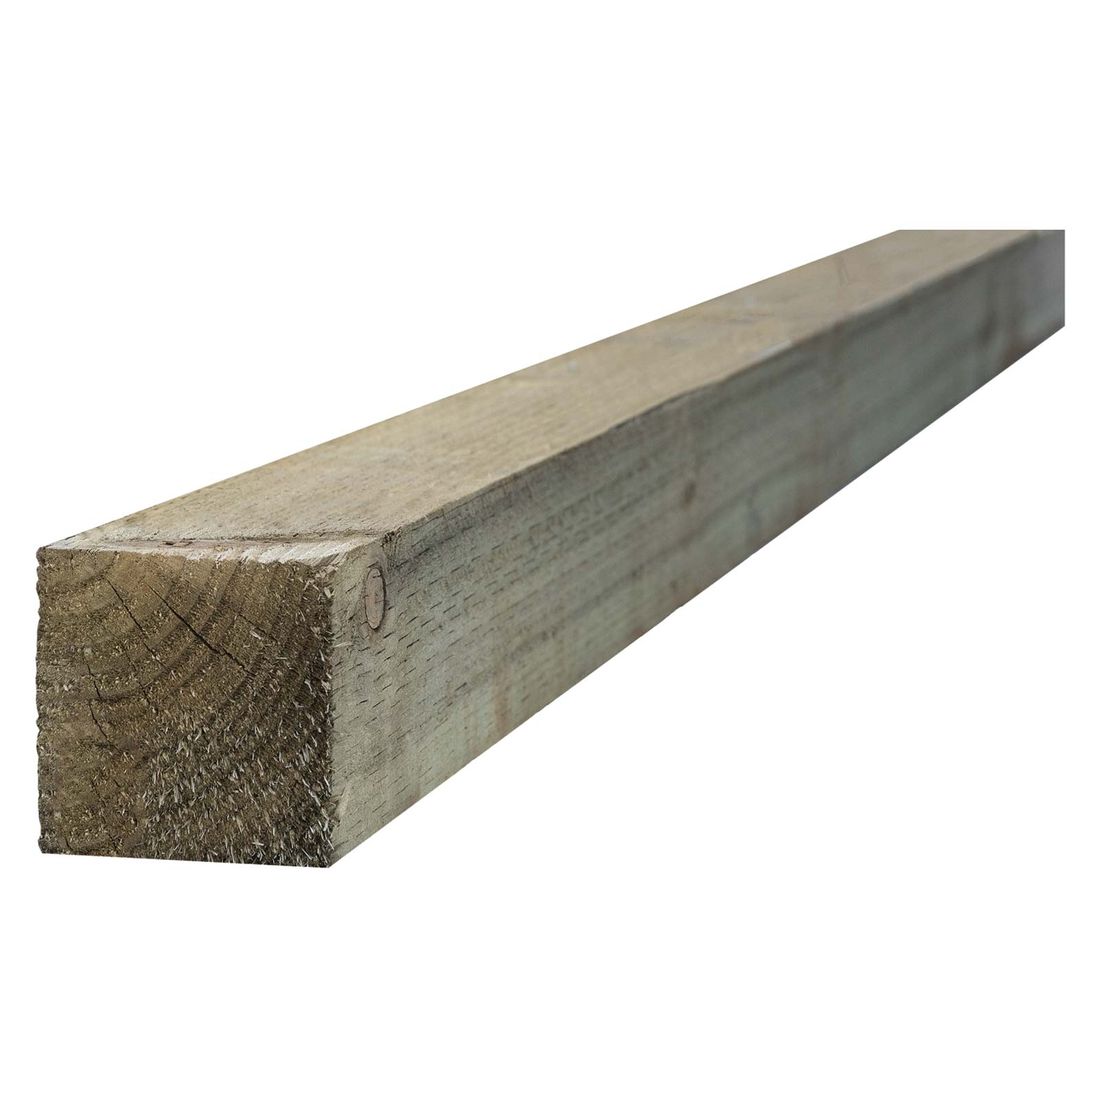 Incised Fence Post Treated Green 100 X 100 4 X 4 3.0M Fsc